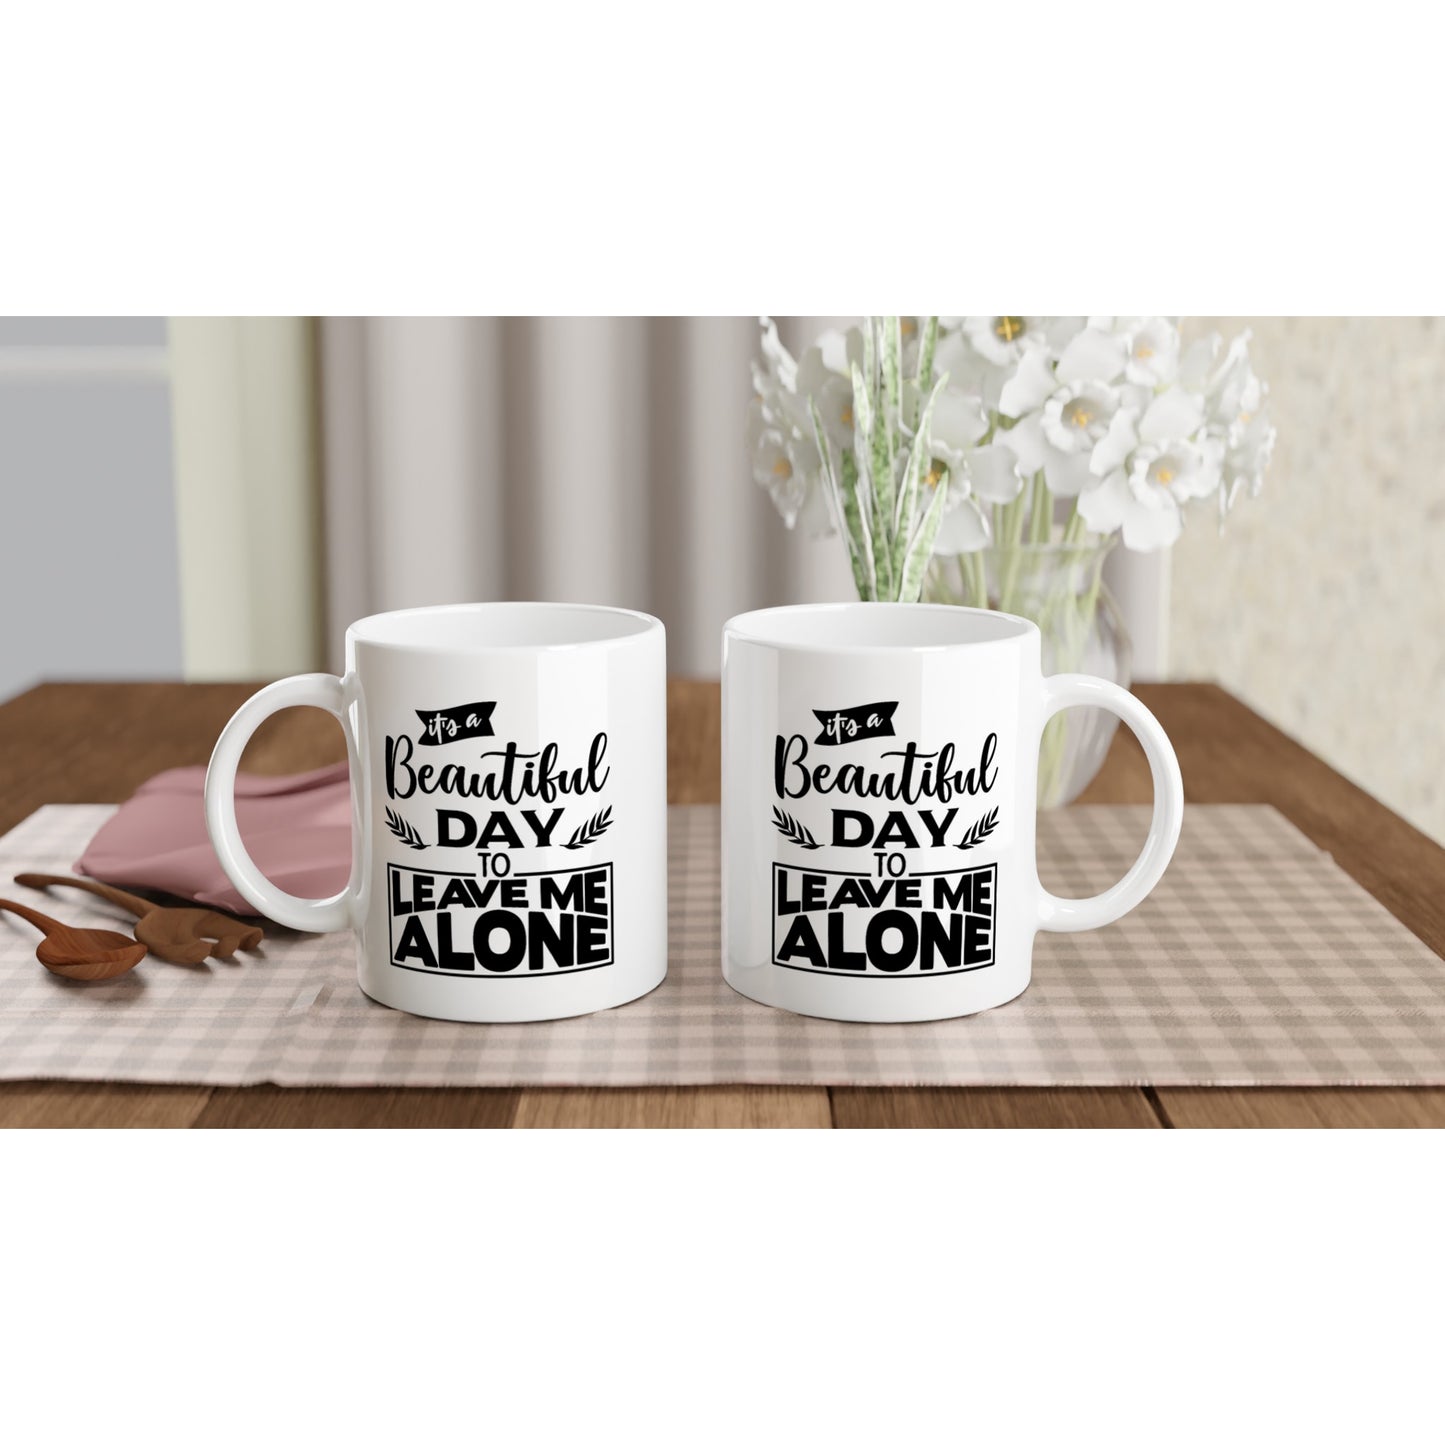 It's a Beautiful Day to Leave Me Alone - White 11oz Ceramic Mug - Mister Snarky's